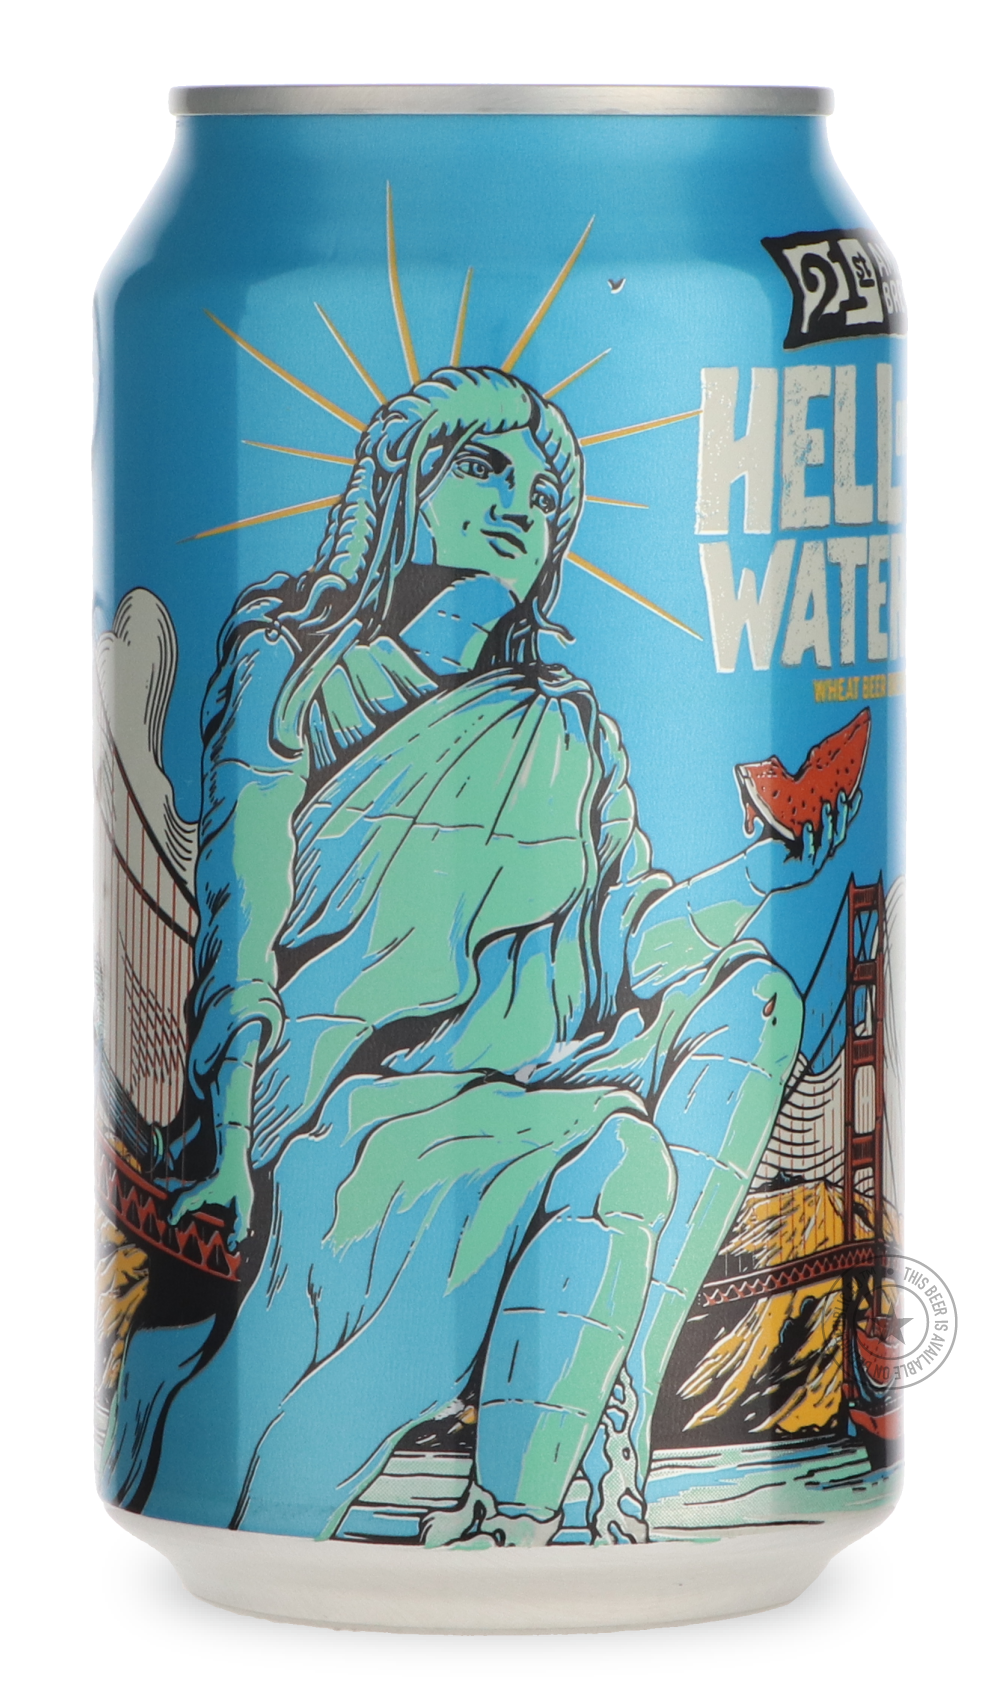 -21st Amendment- Hell or High: Watermelon-Pale- Only @ Beer Republic - The best online beer store for American & Canadian craft beer - Buy beer online from the USA and Canada - Bier online kopen - Amerikaans bier kopen - Craft beer store - Craft beer kopen - Amerikanisch bier kaufen - Bier online kaufen - Acheter biere online - IPA - Stout - Porter - New England IPA - Hazy IPA - Imperial Stout - Barrel Aged - Barrel Aged Imperial Stout - Brown - Dark beer - Blond - Blonde - Pilsner - Lager - Wheat - Weizen 